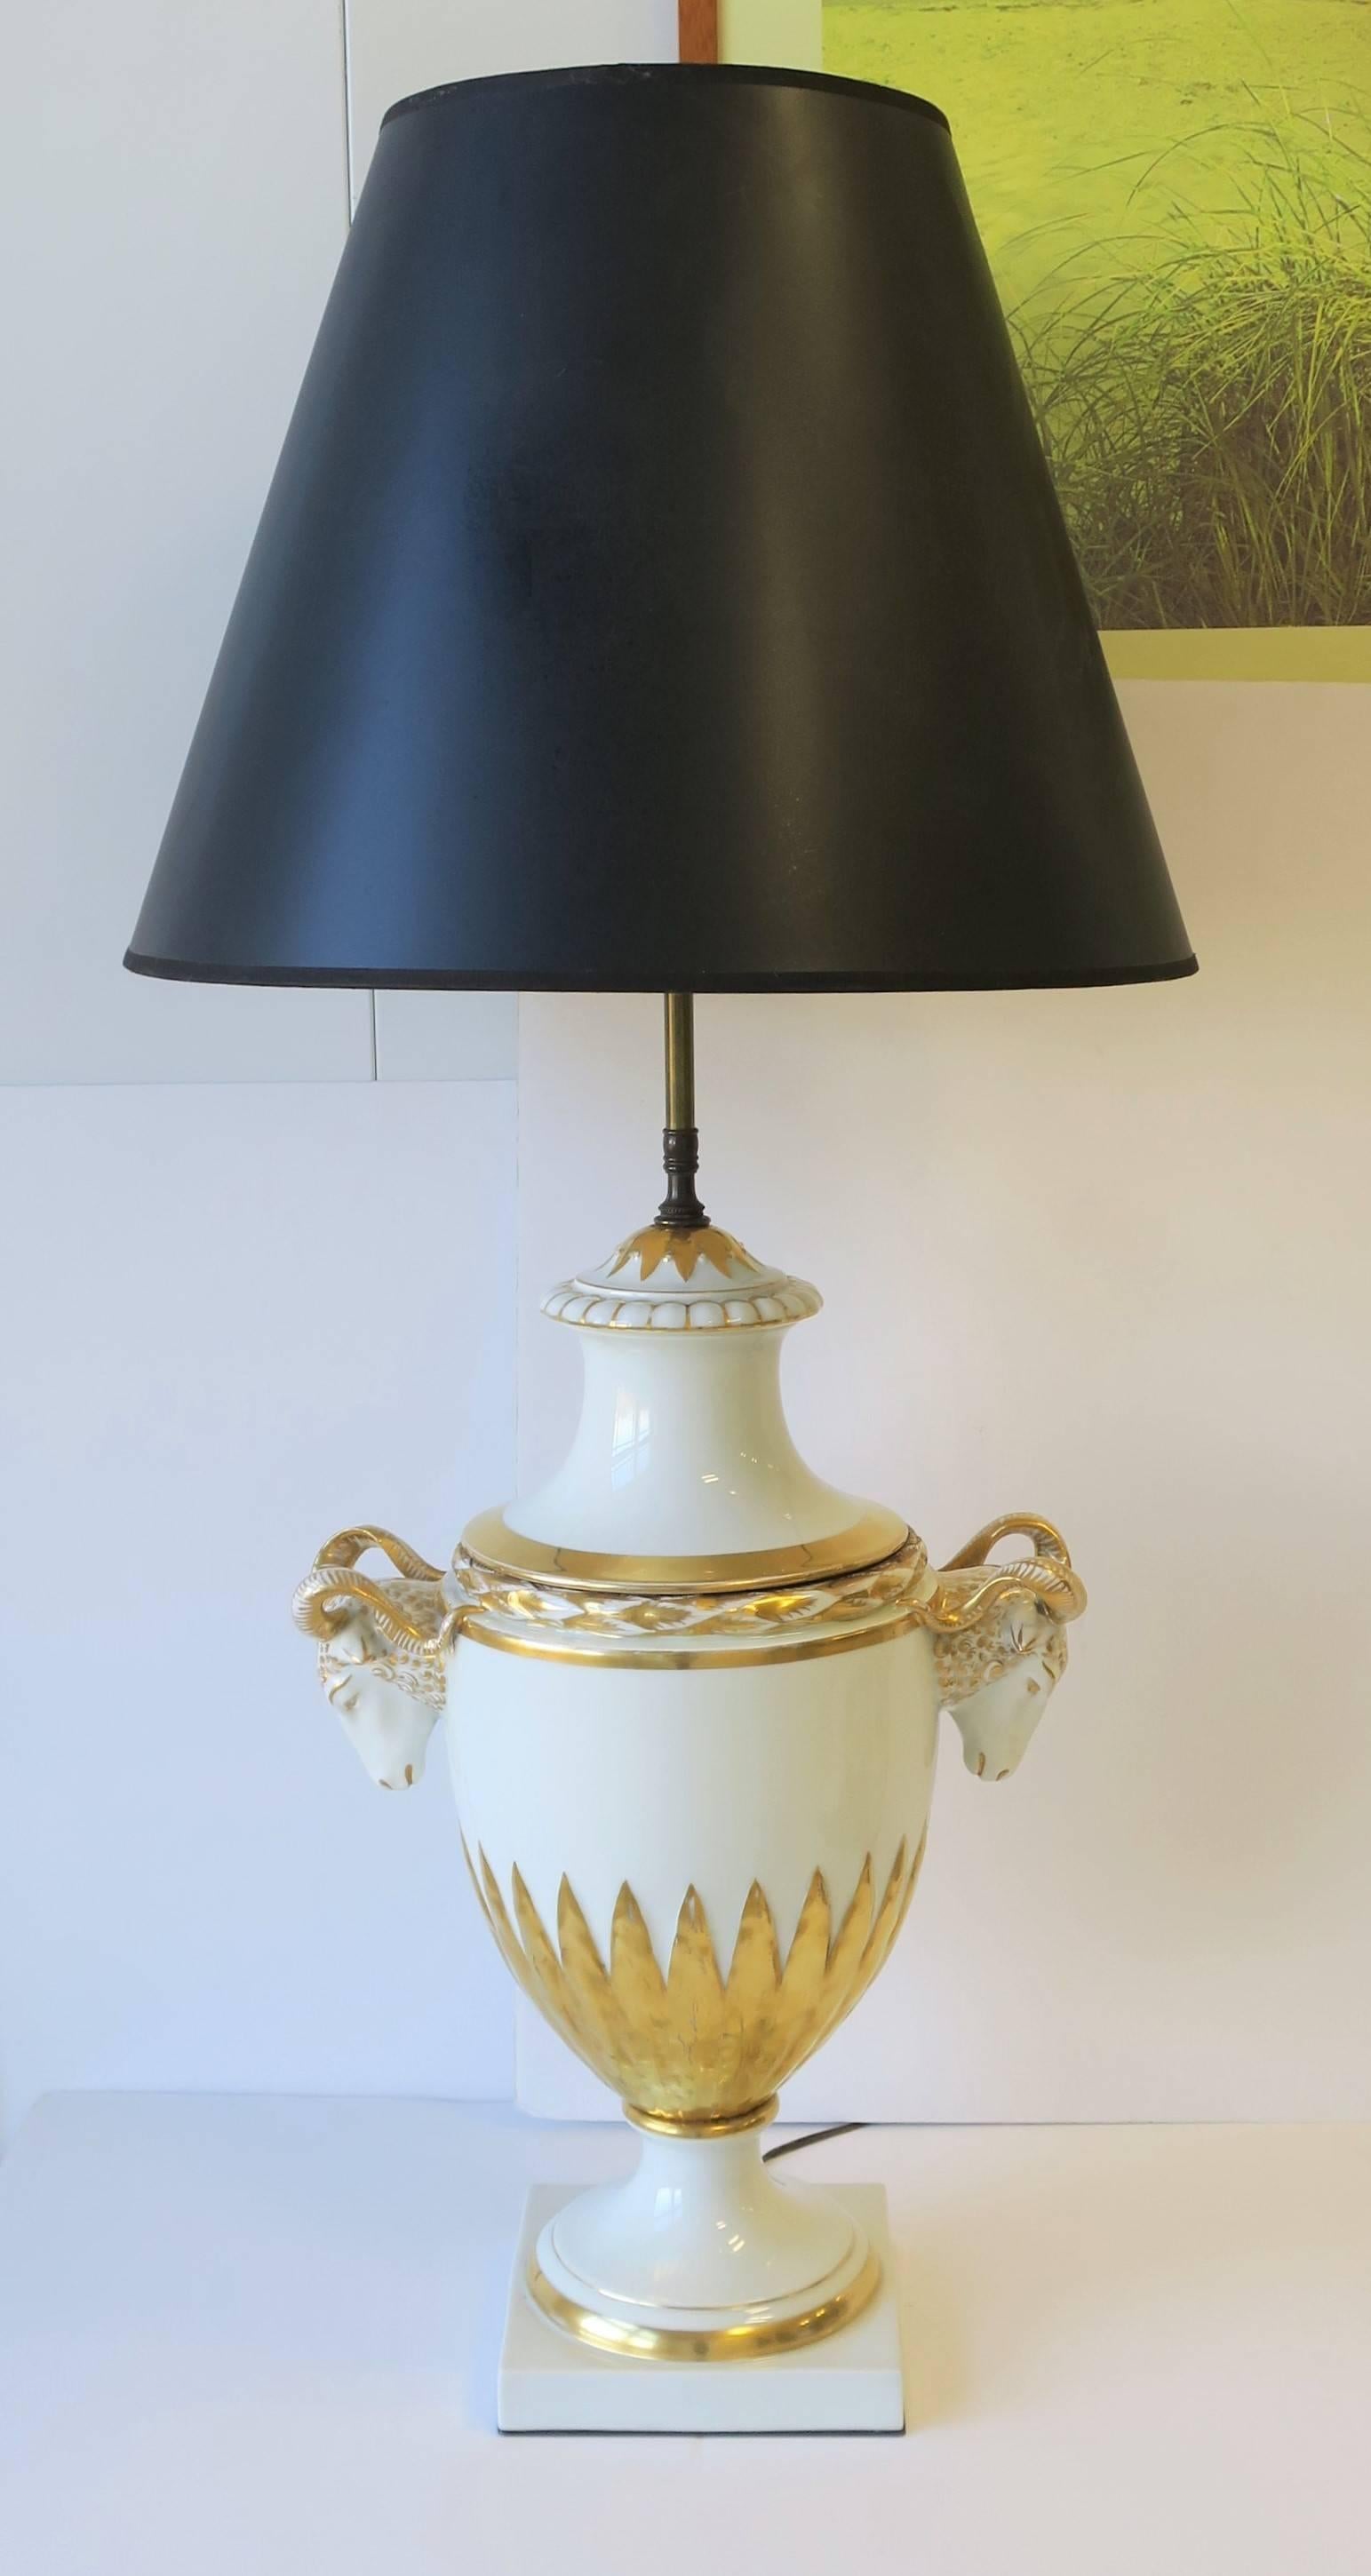 A gorgeous large white and gold porcelain table lamp in urn form with detailed ram's head design, in the Empire style, attributed to Furstenberg Porcelain, Germany, circa 20th century. Beautiful detail from top to bottom as shown in images. Lamp